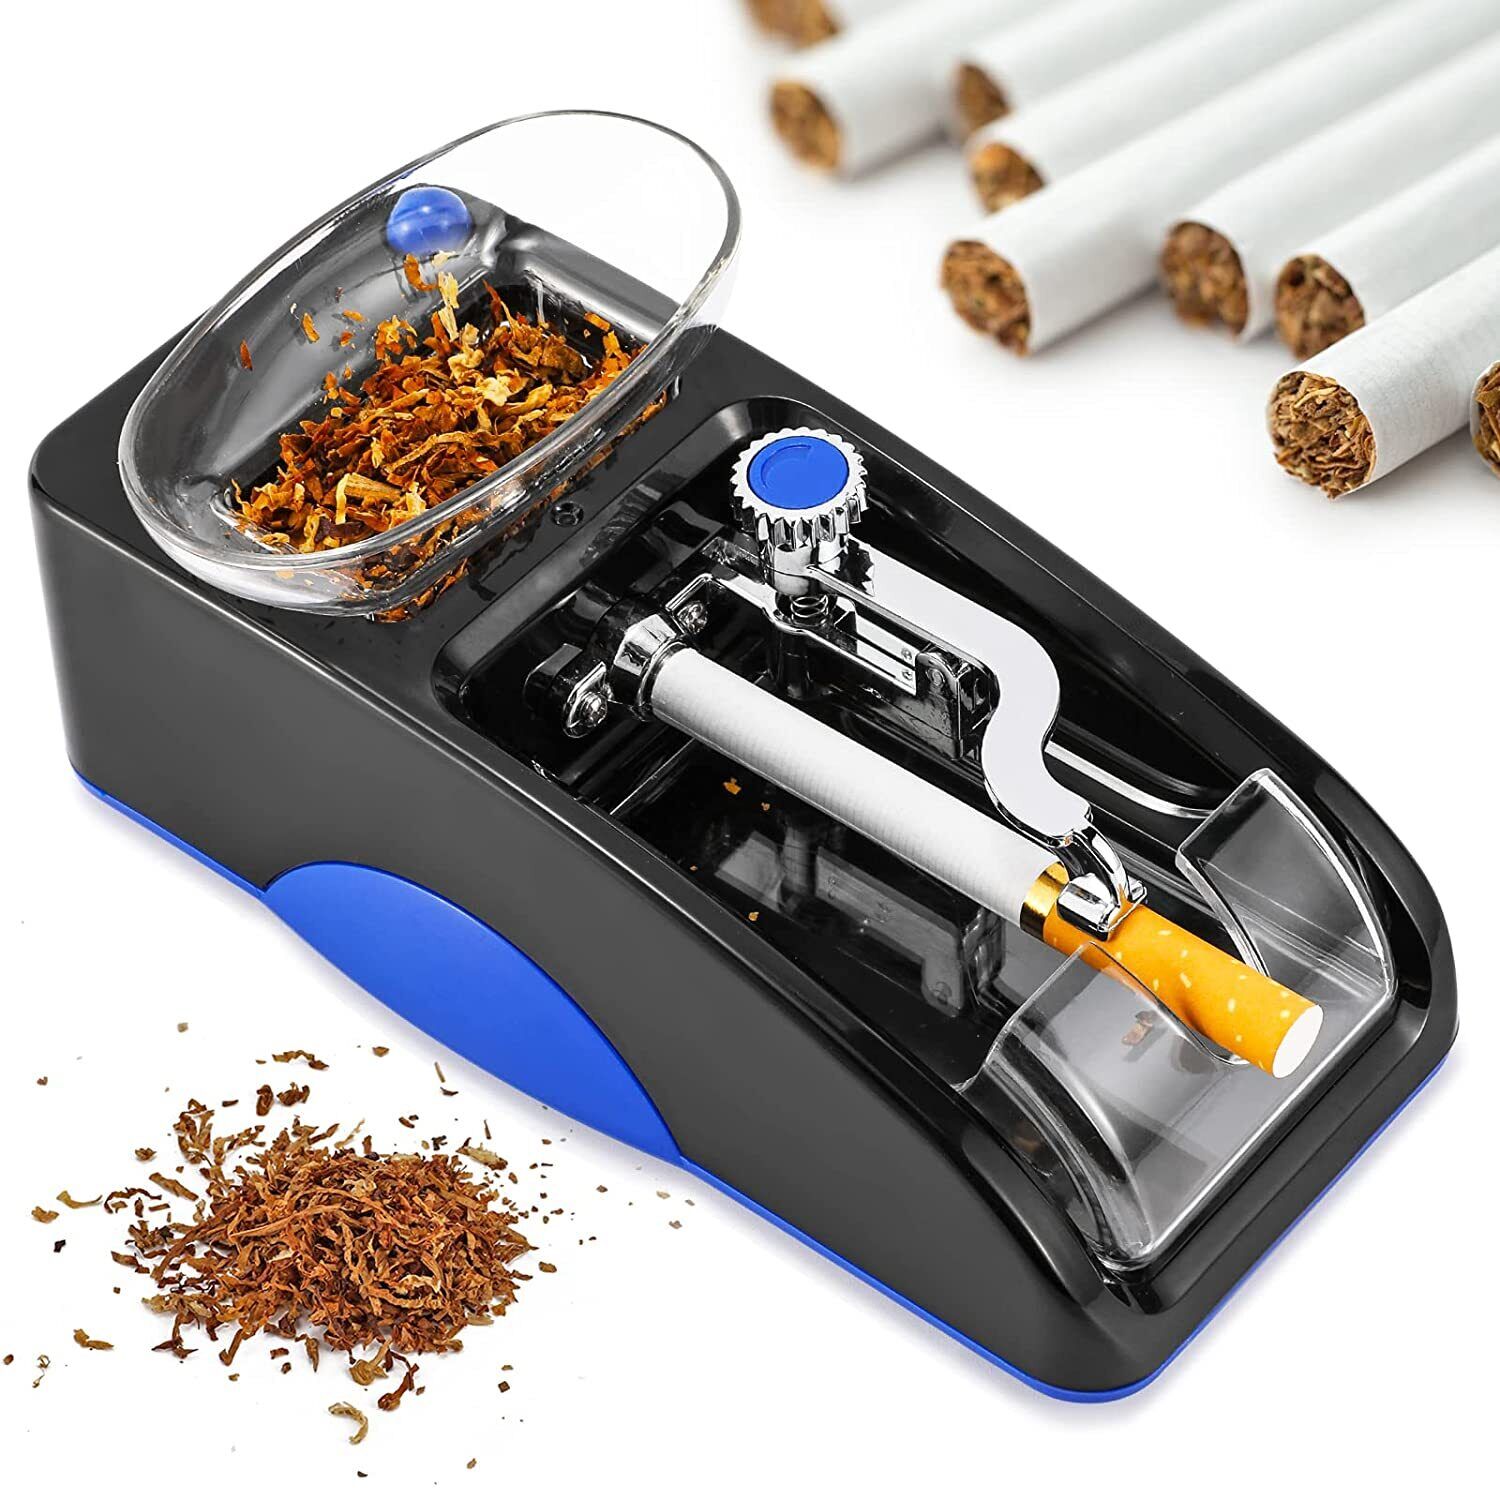 Cigarette Machine Automatic Electric Rolling Roller Tobacco Injector Maker US